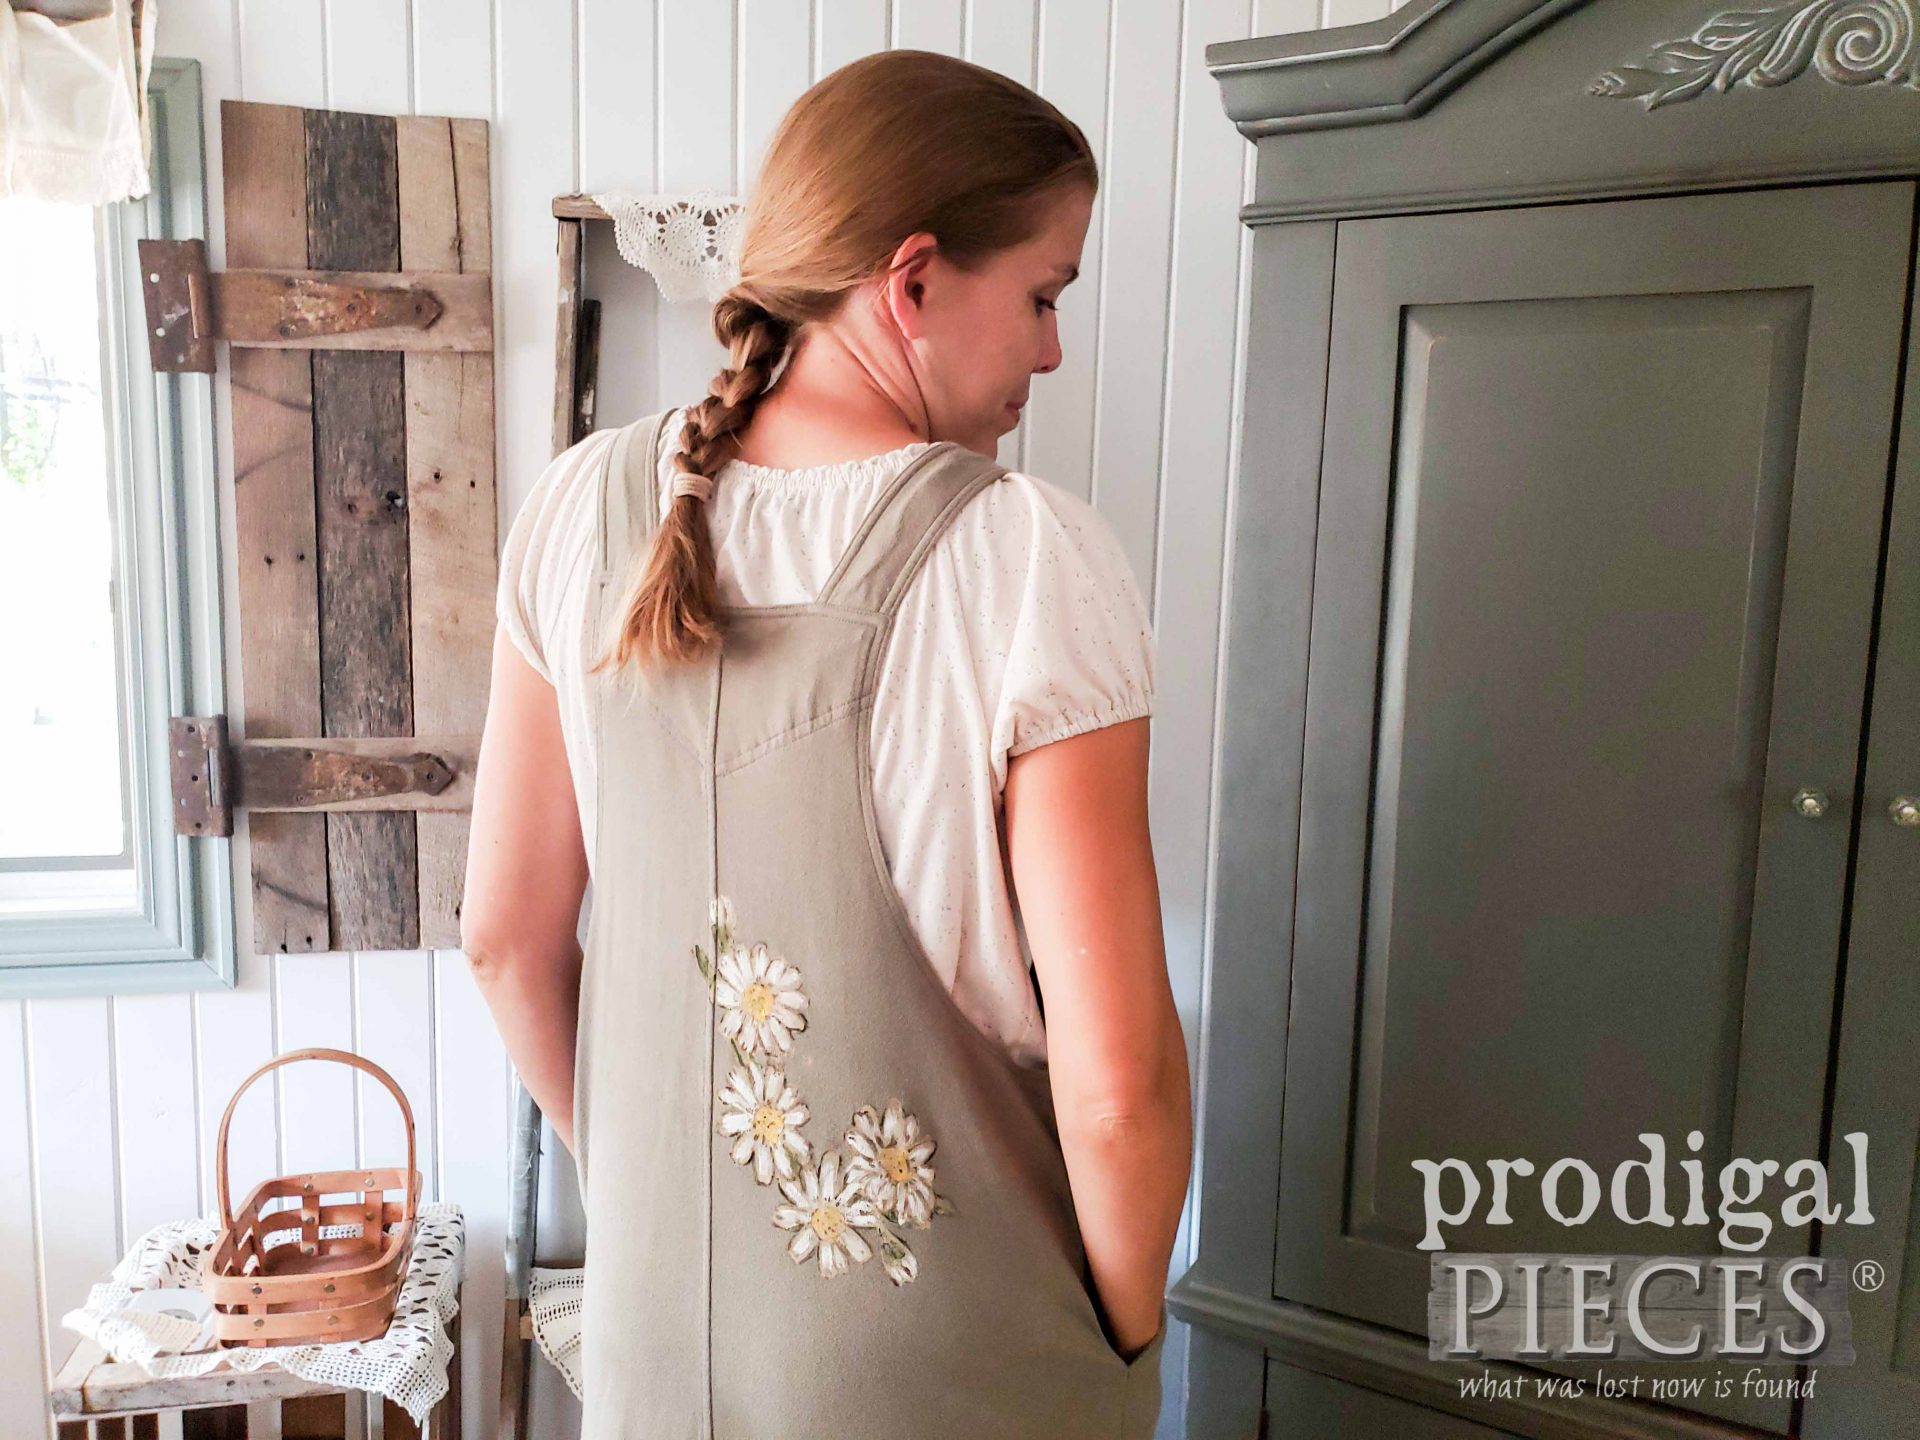 How to Fix Bleached Spots on a Garments | Larissa of Prodigal Pieces shares a step-by-step video tutorial at prodigalpieces.com #prodigalpieces #diy #sewing #fashion #women #crafts 